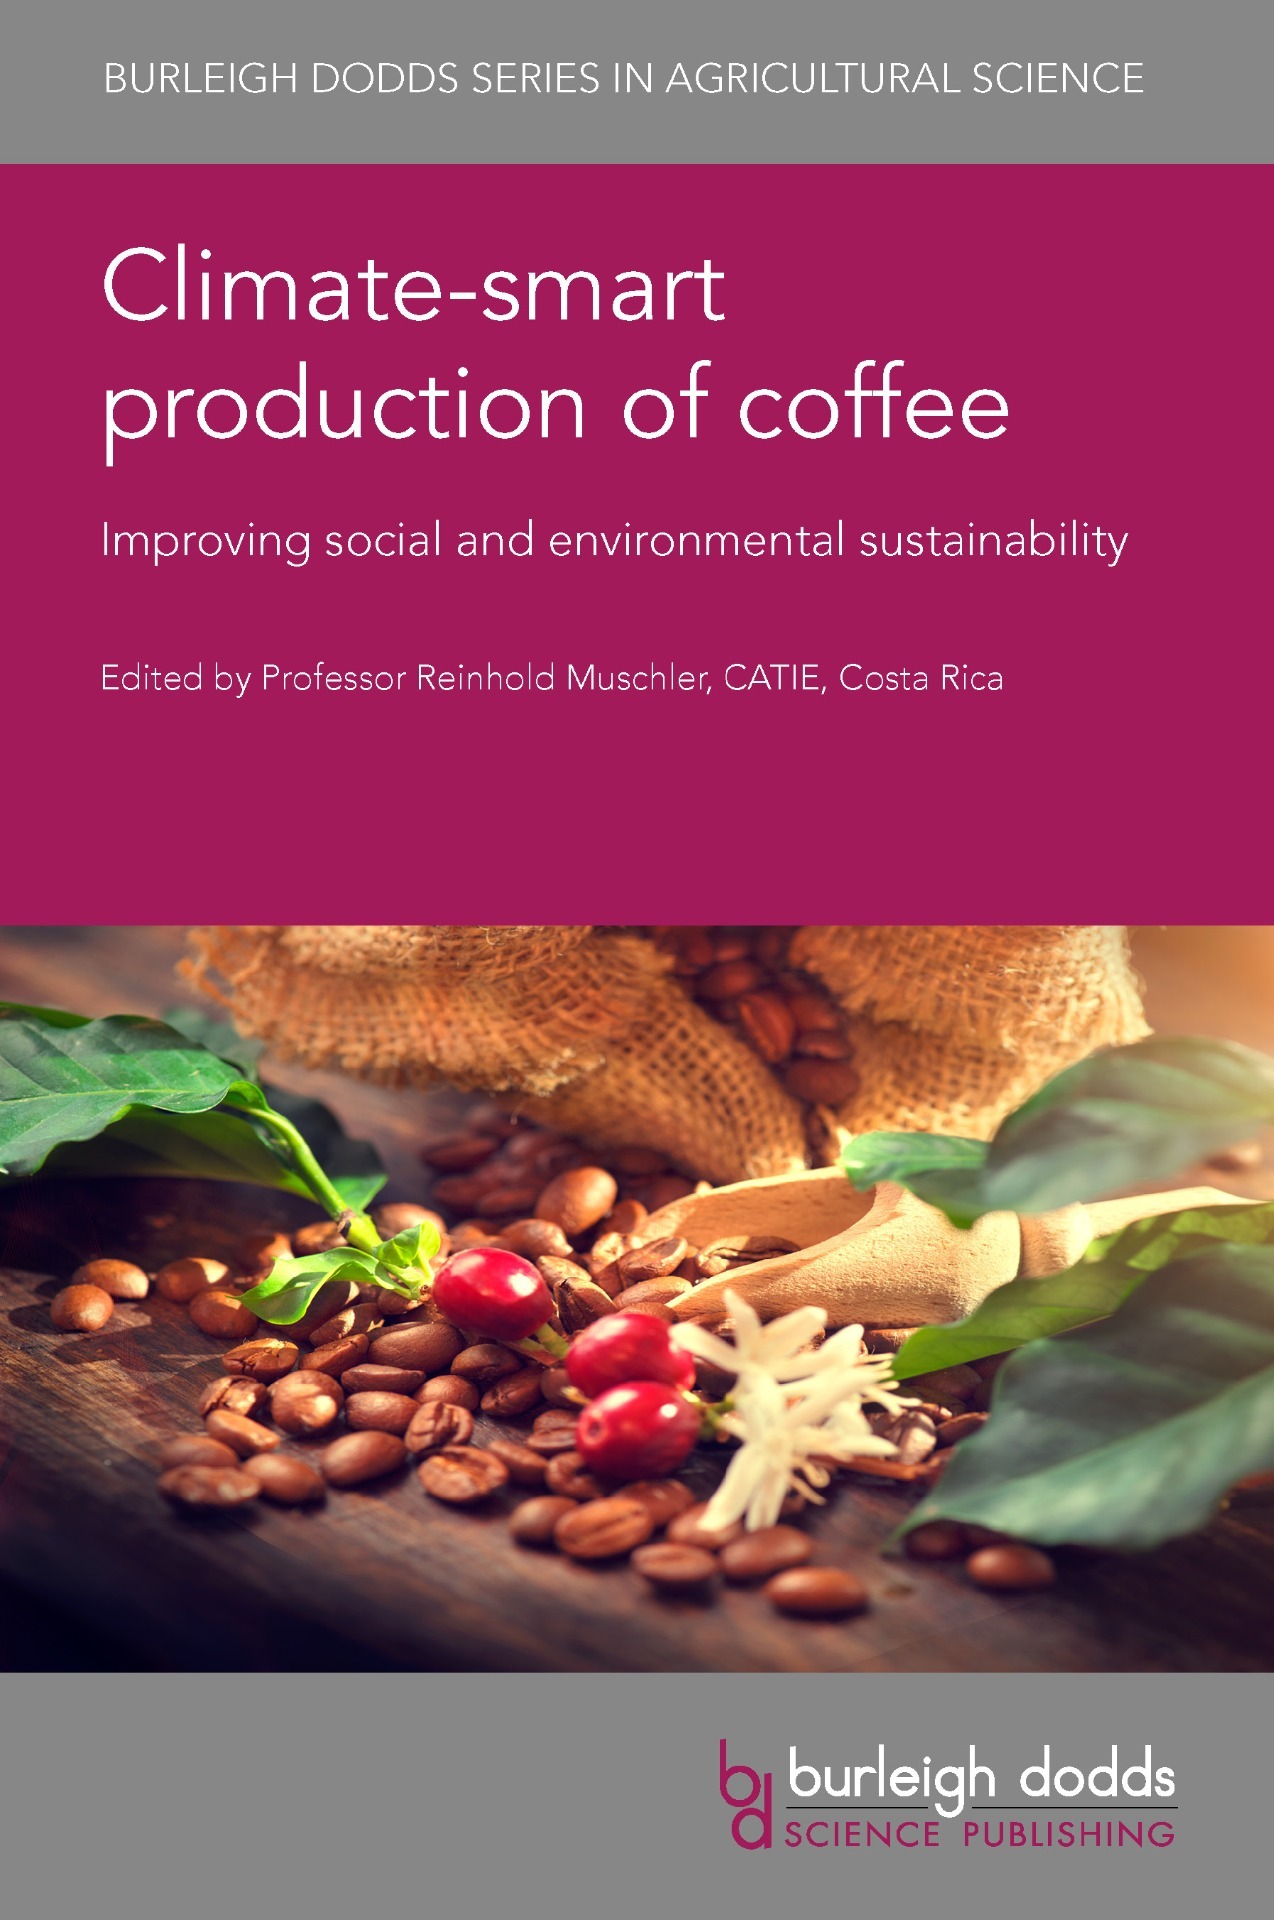 Climate-smart production of coffee: Improving social and environmental sustainability